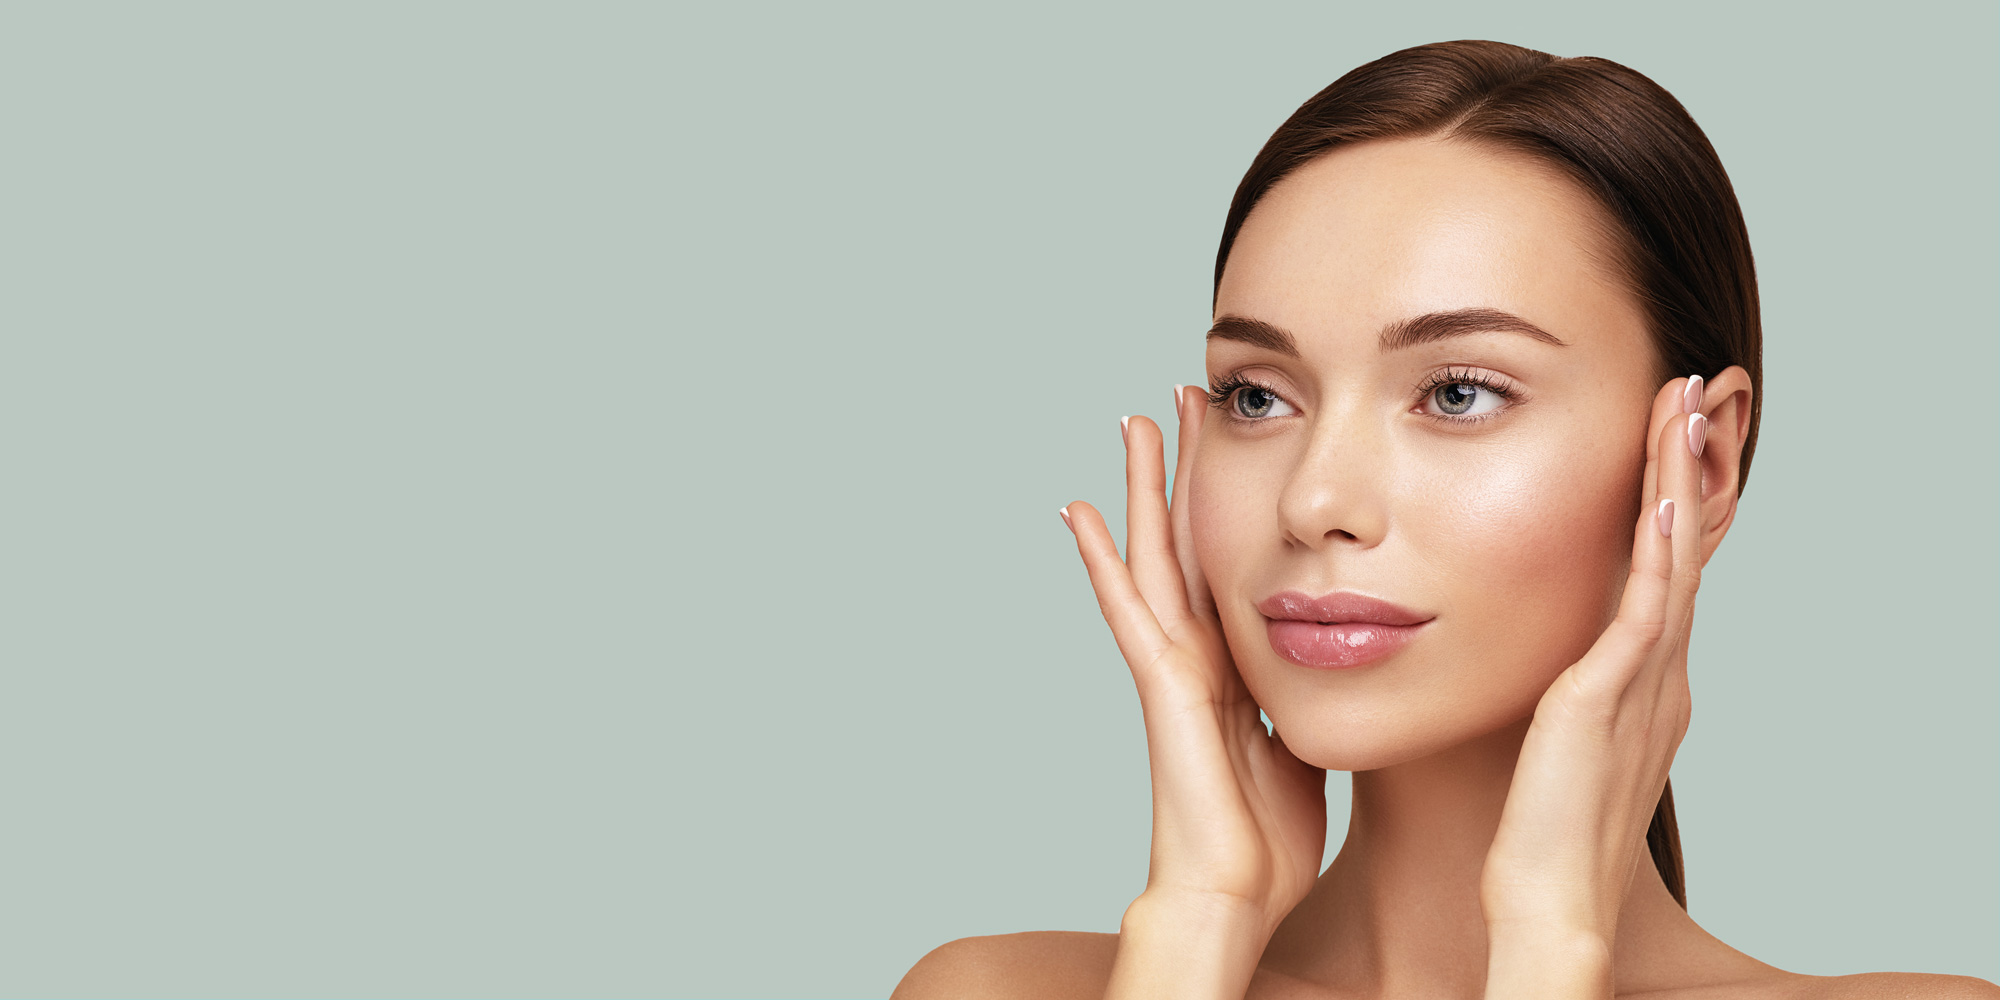 Skin and Facial Treatments that will Bring Back Your Skin’s Youth